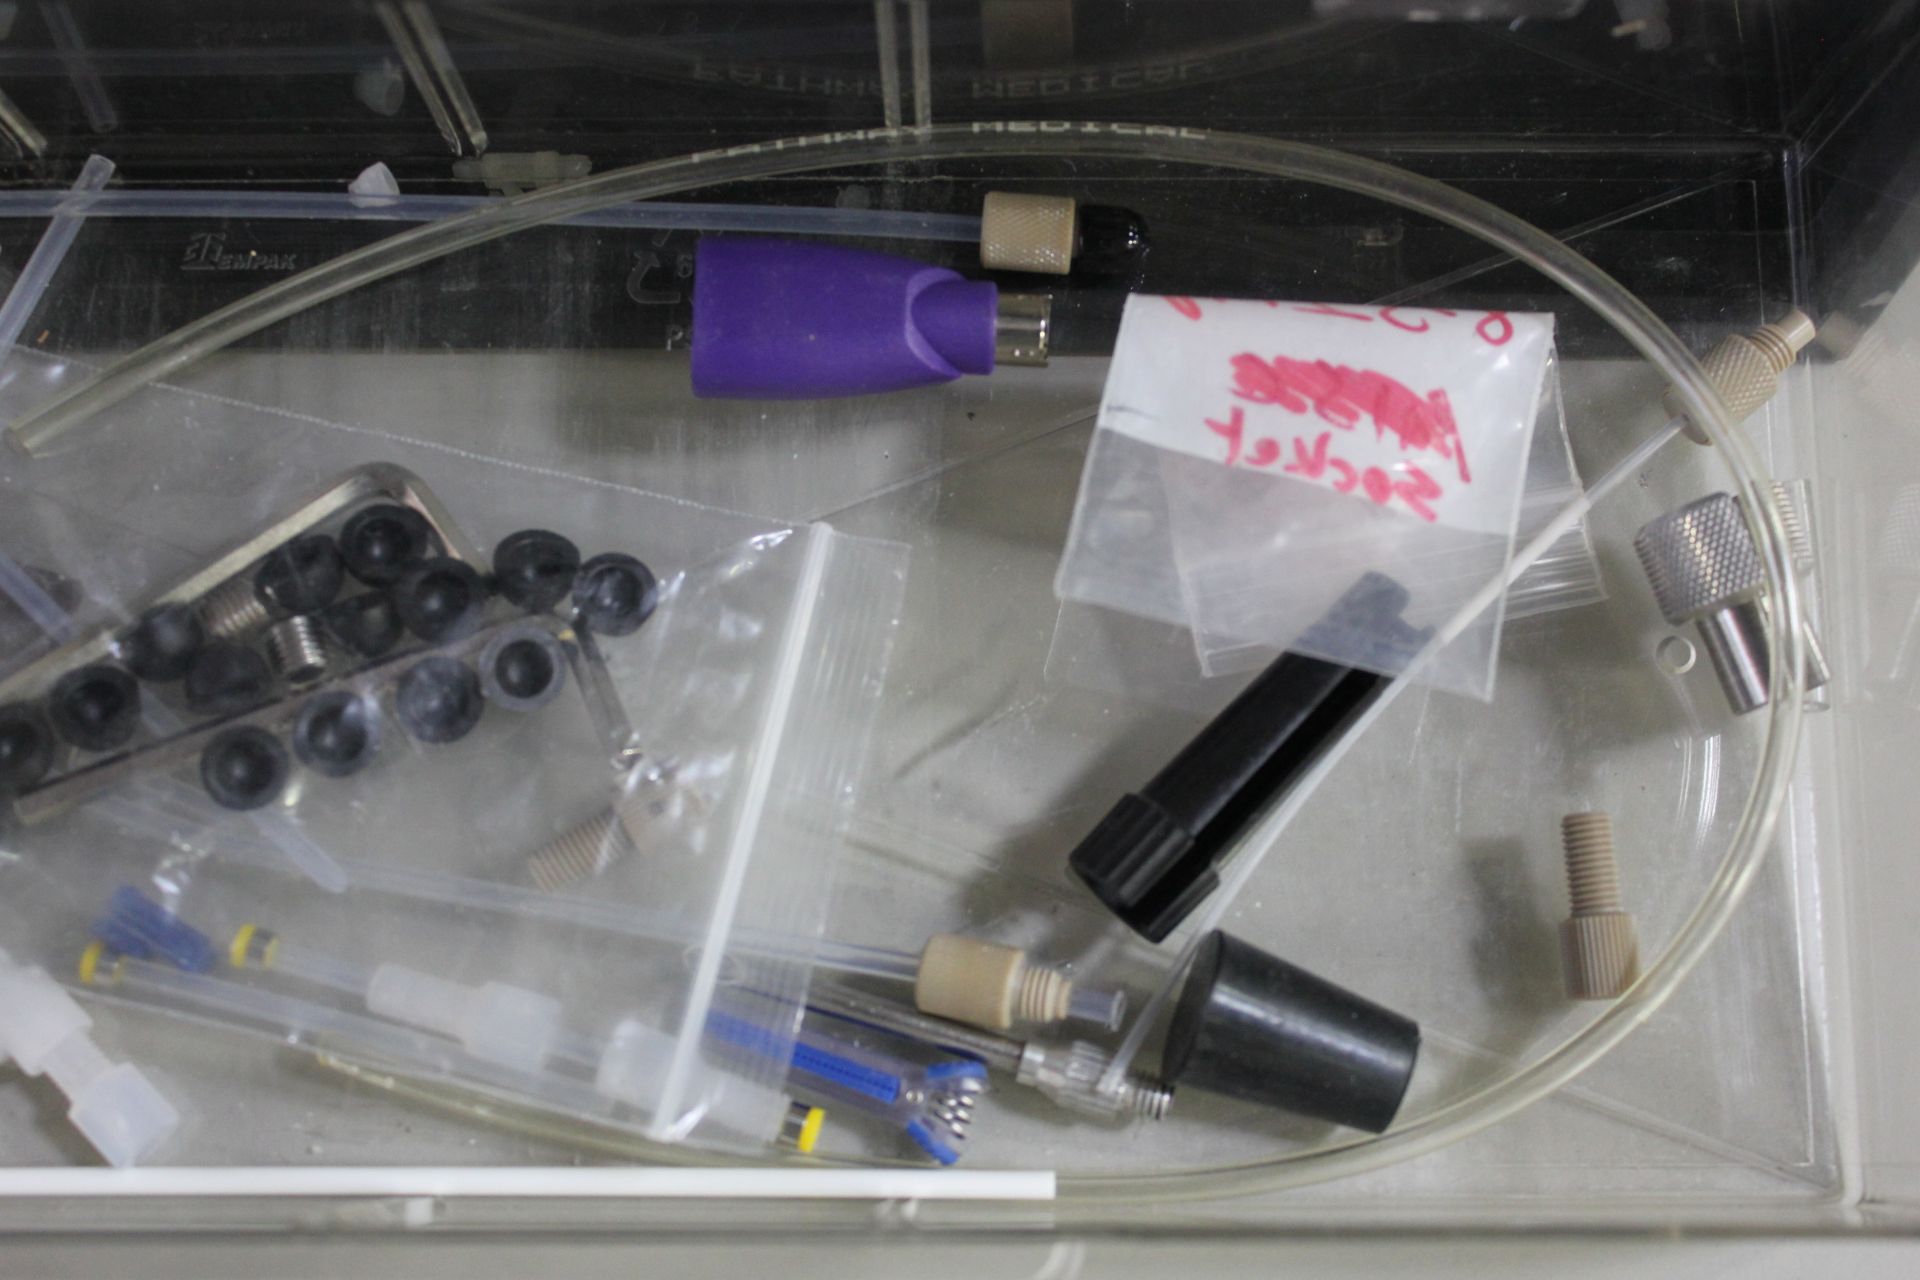 UPCHURCH SCIENTIFIC CABINET WITH HPLC FITTINGS - Image 10 of 12